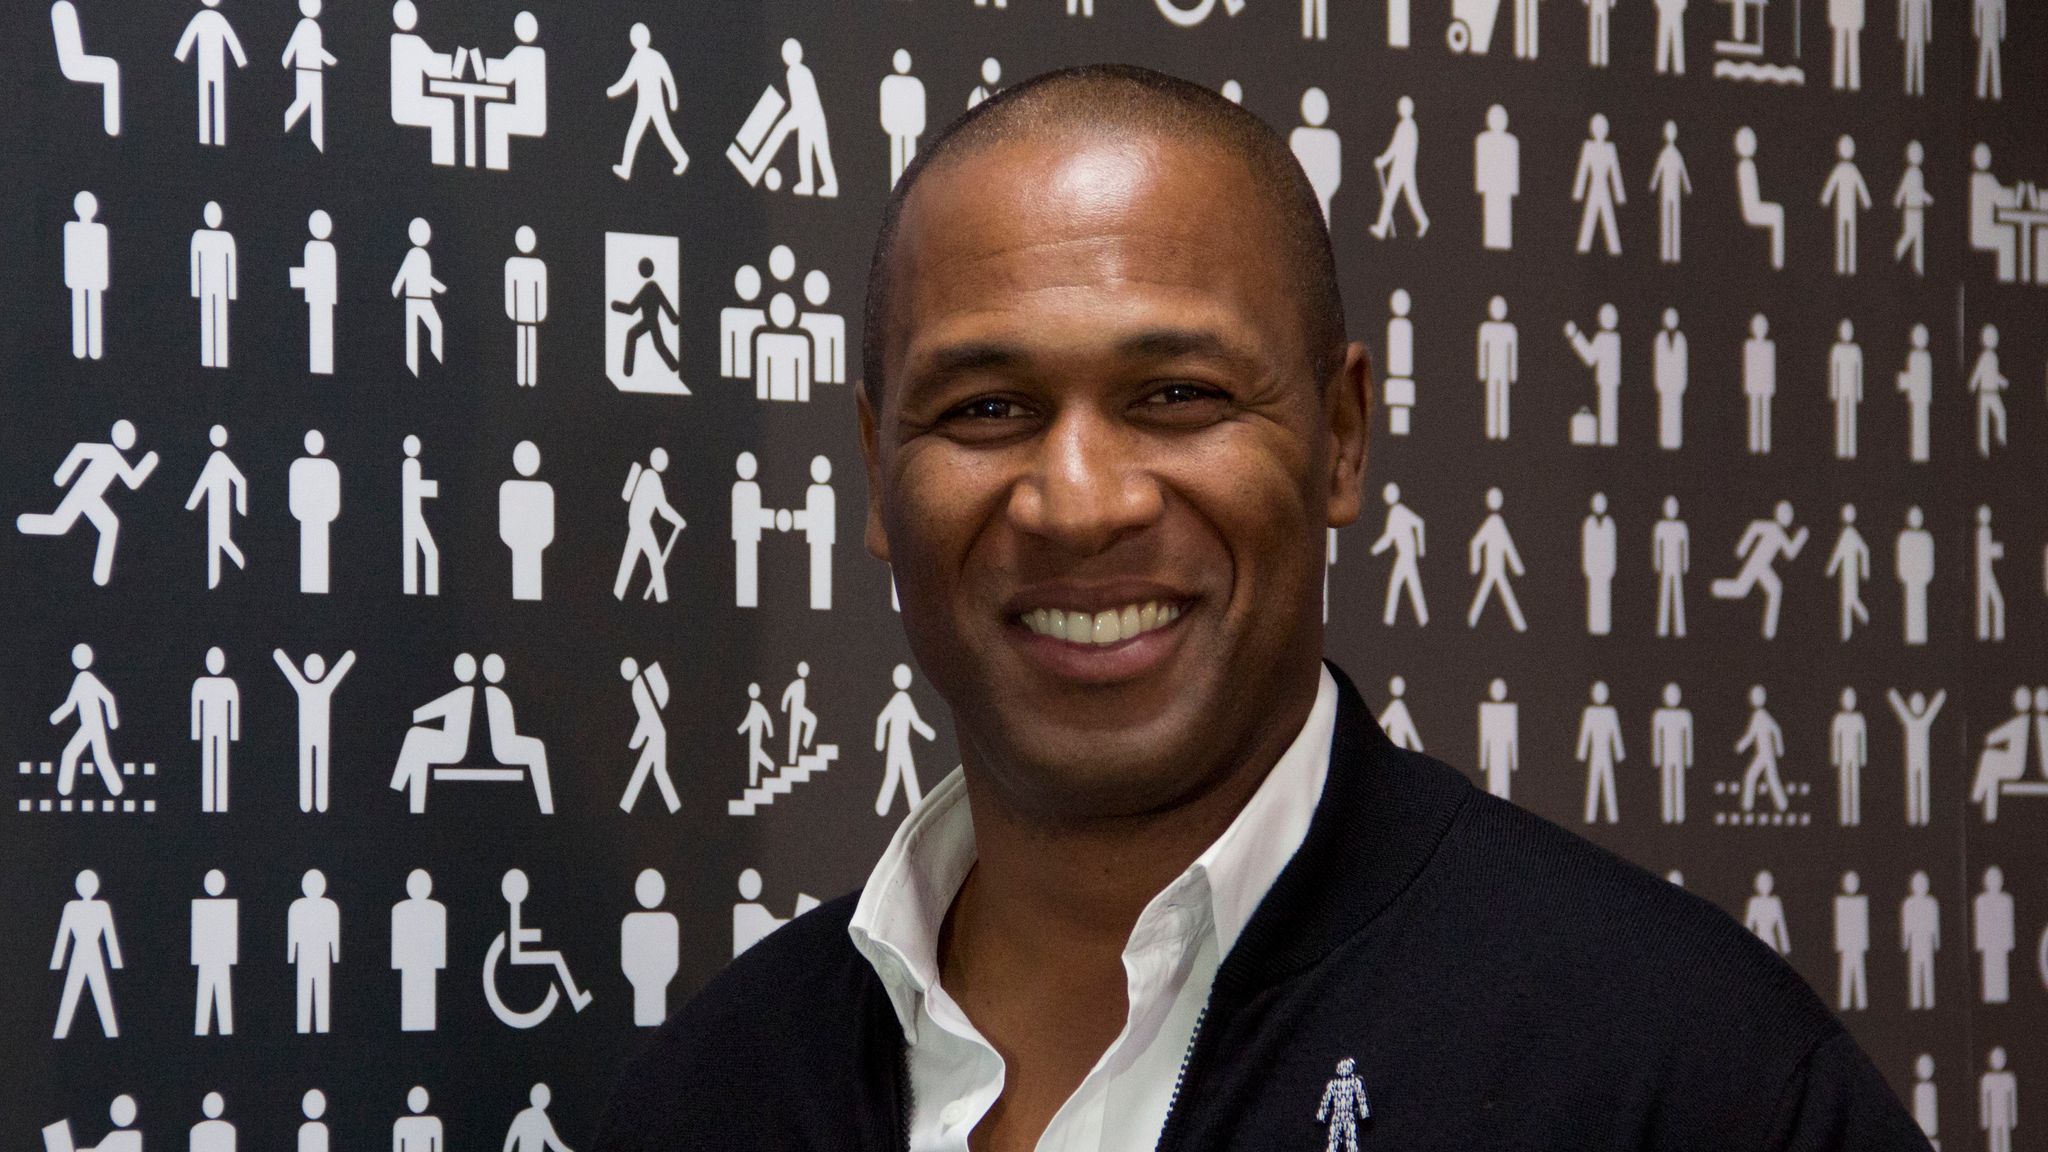 Les Ferdinand interview: Why QPR are turning their fortunes around, Football News